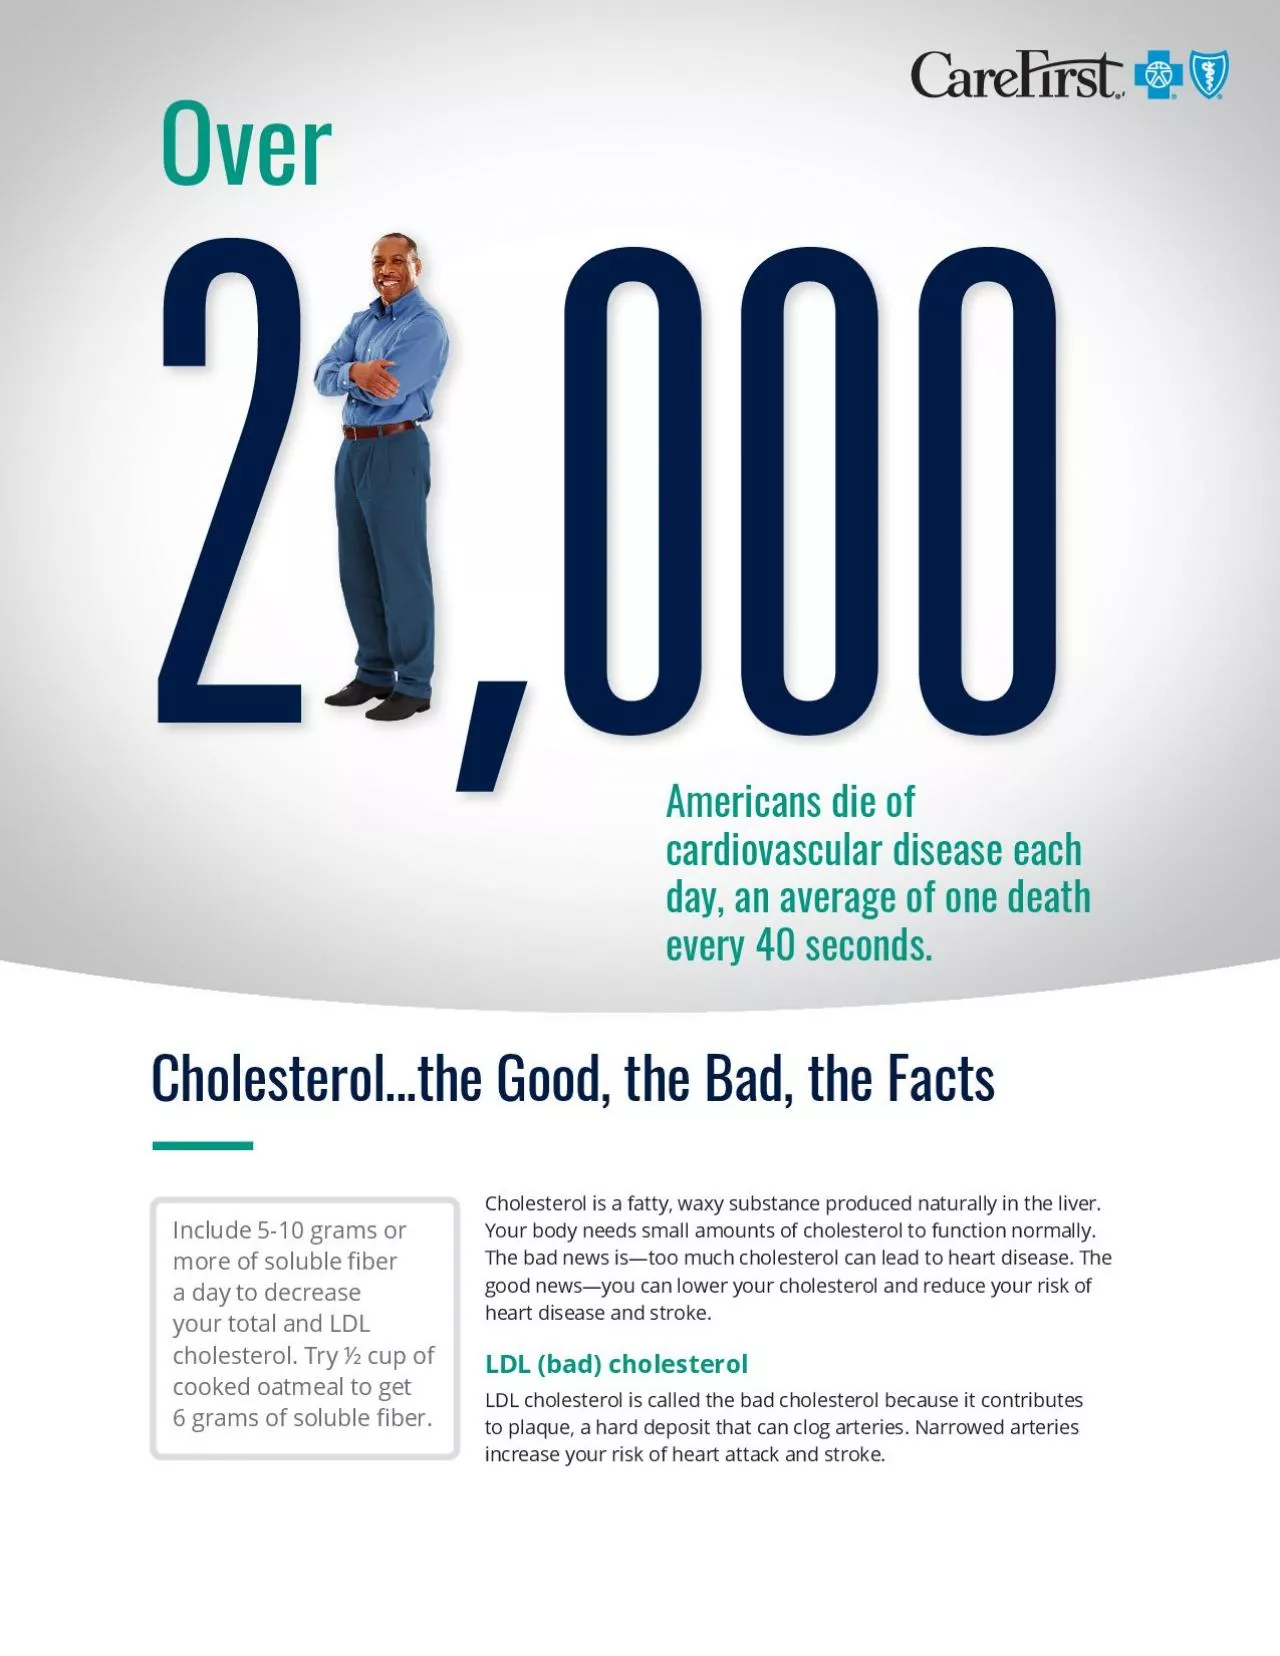 Cholesterol the Good the Bad the Facts